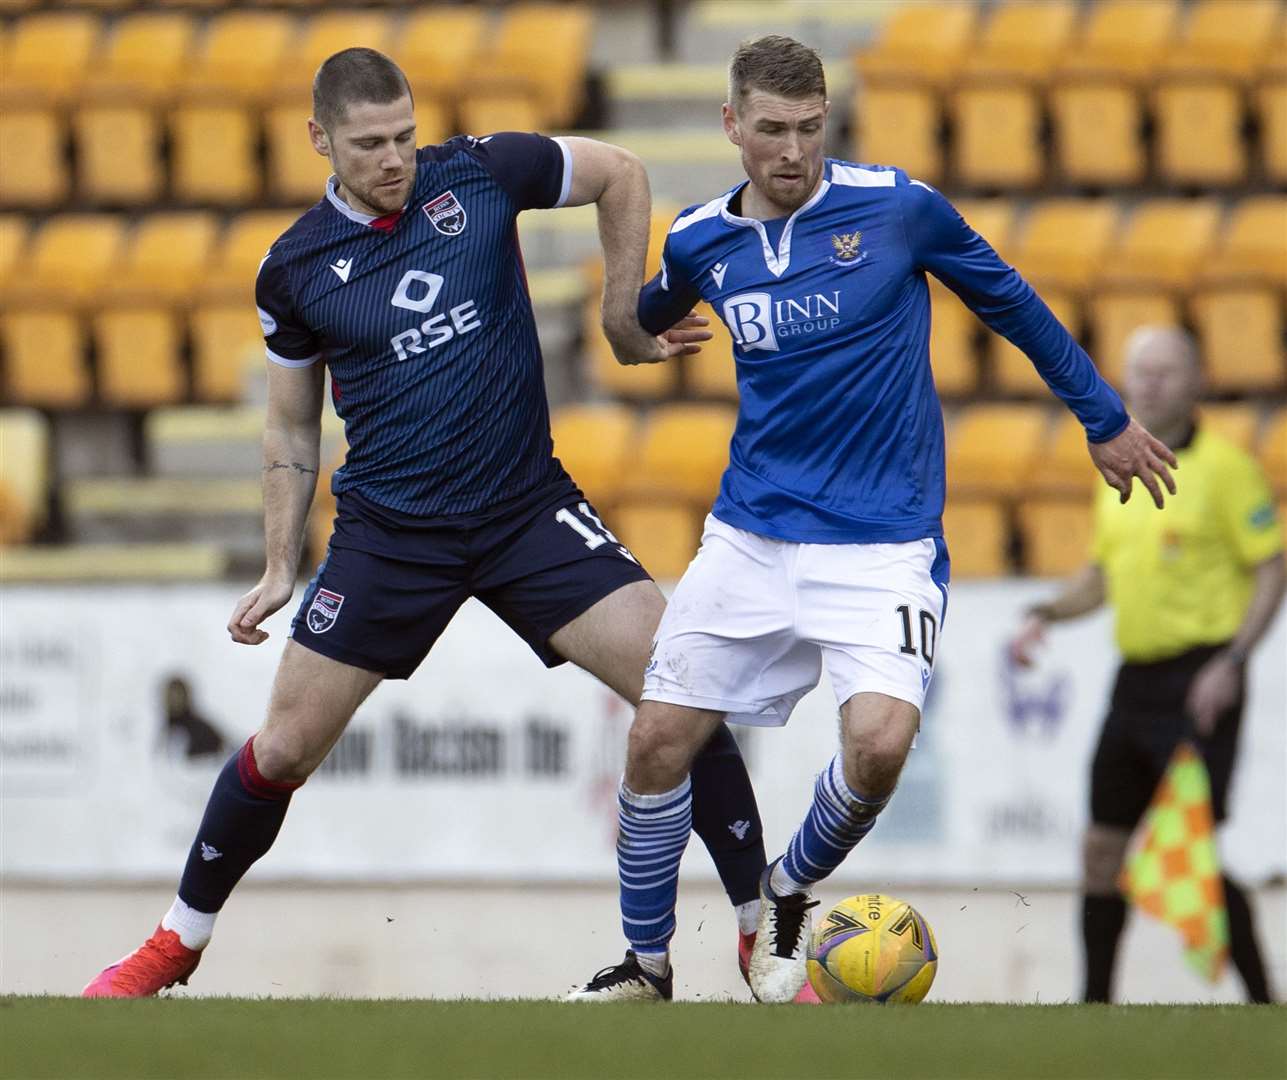 Ross County's Iain Vigurs and St.Johnstone's David Wotherspoon clash in 2021